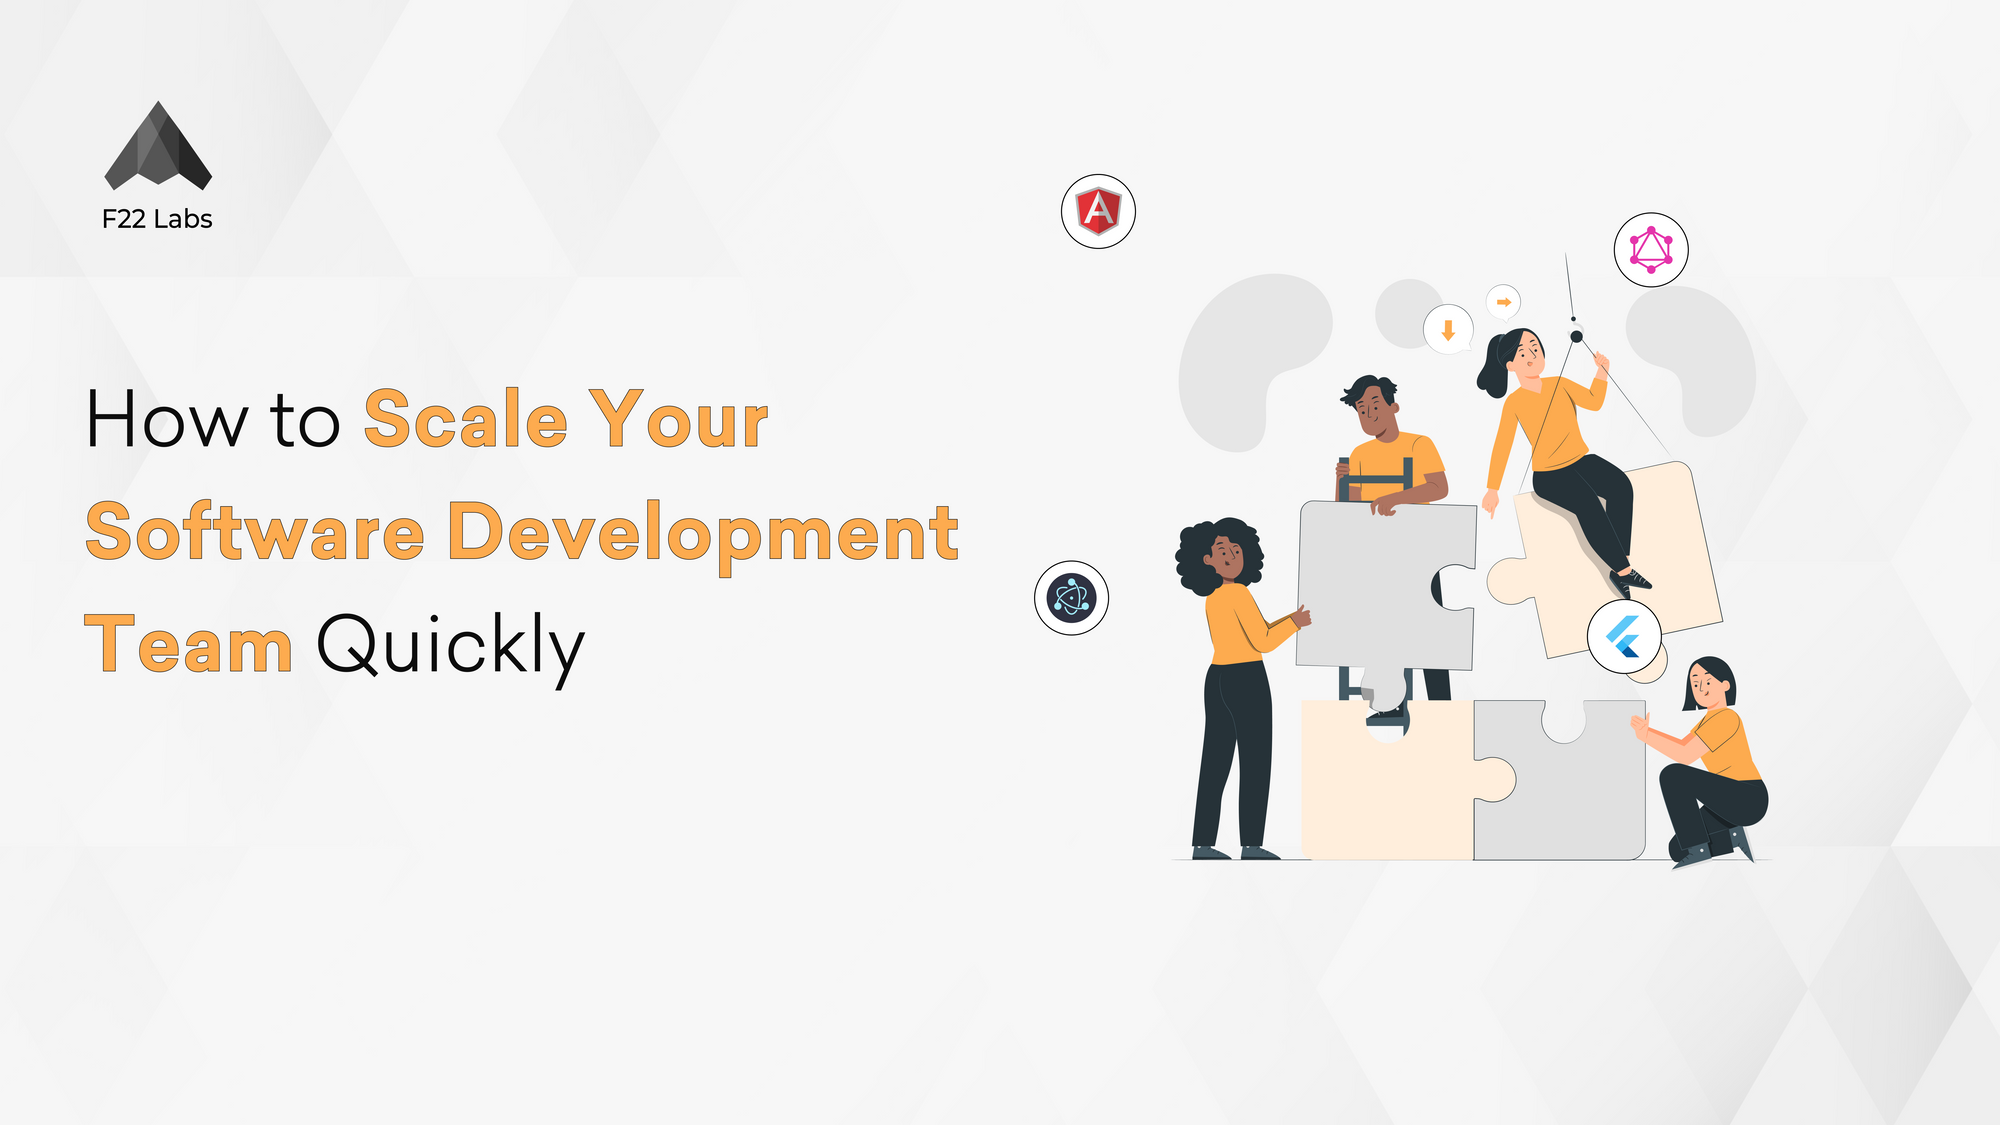 How Should You Scale Your Software Development Team Quickly? Hero